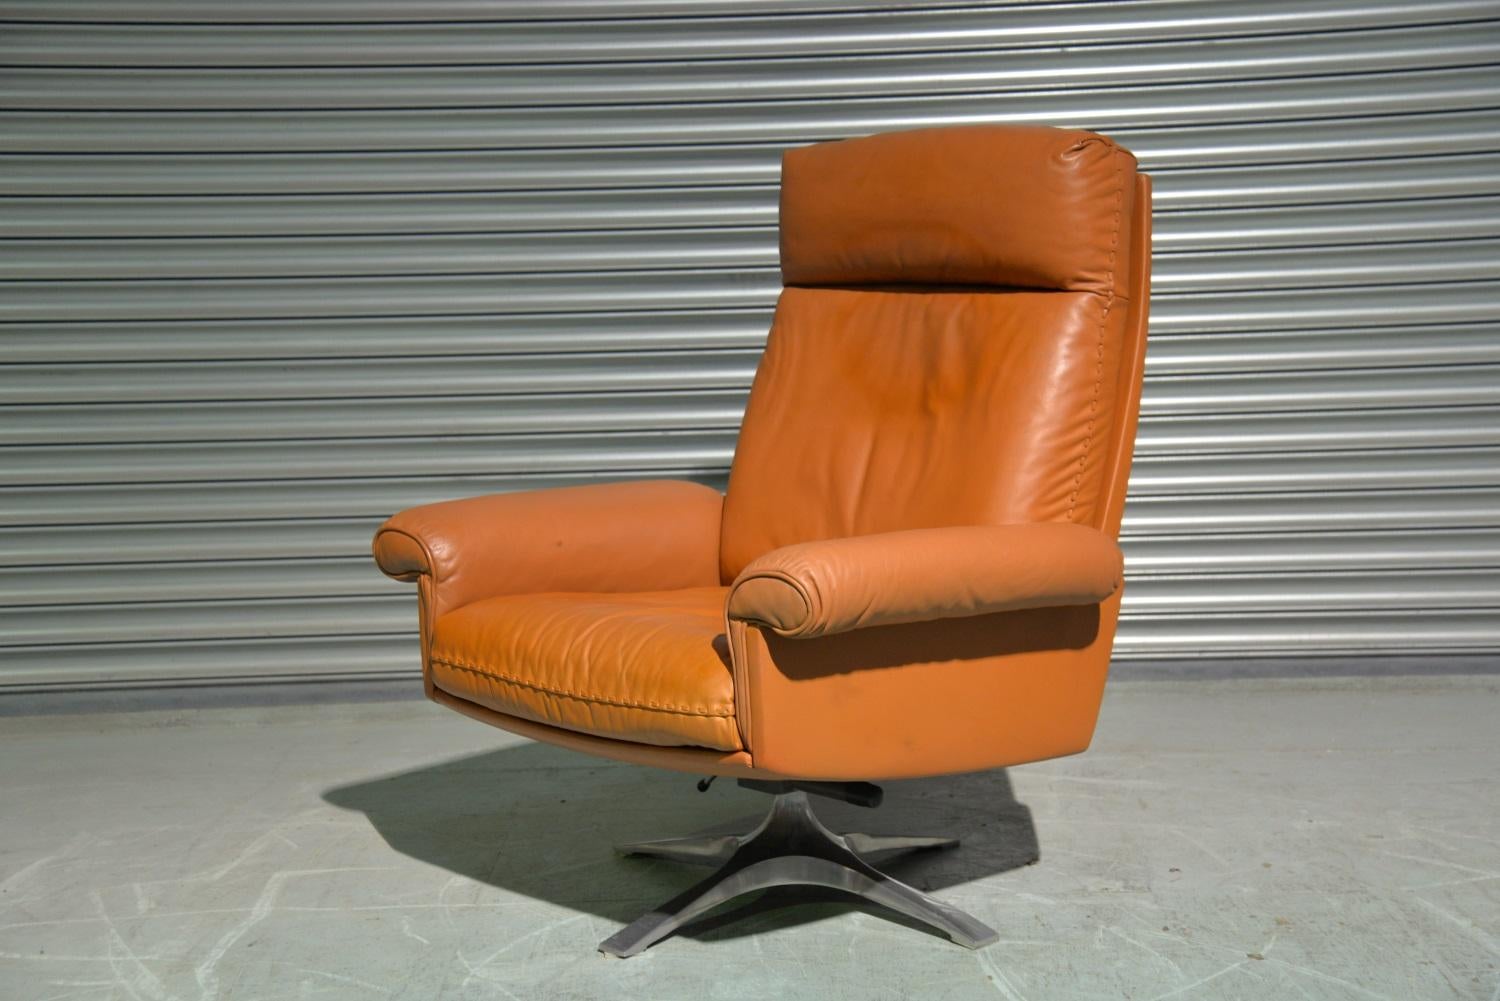 Discounted airfreight for our US and International customers (from 2 weeks door to door)

We bring to you a vintage 1970s de Sede DS 31 swivel high-back armchair. The armchair was hand built circa 1970s by de Sede craftsman from Switzerland and has